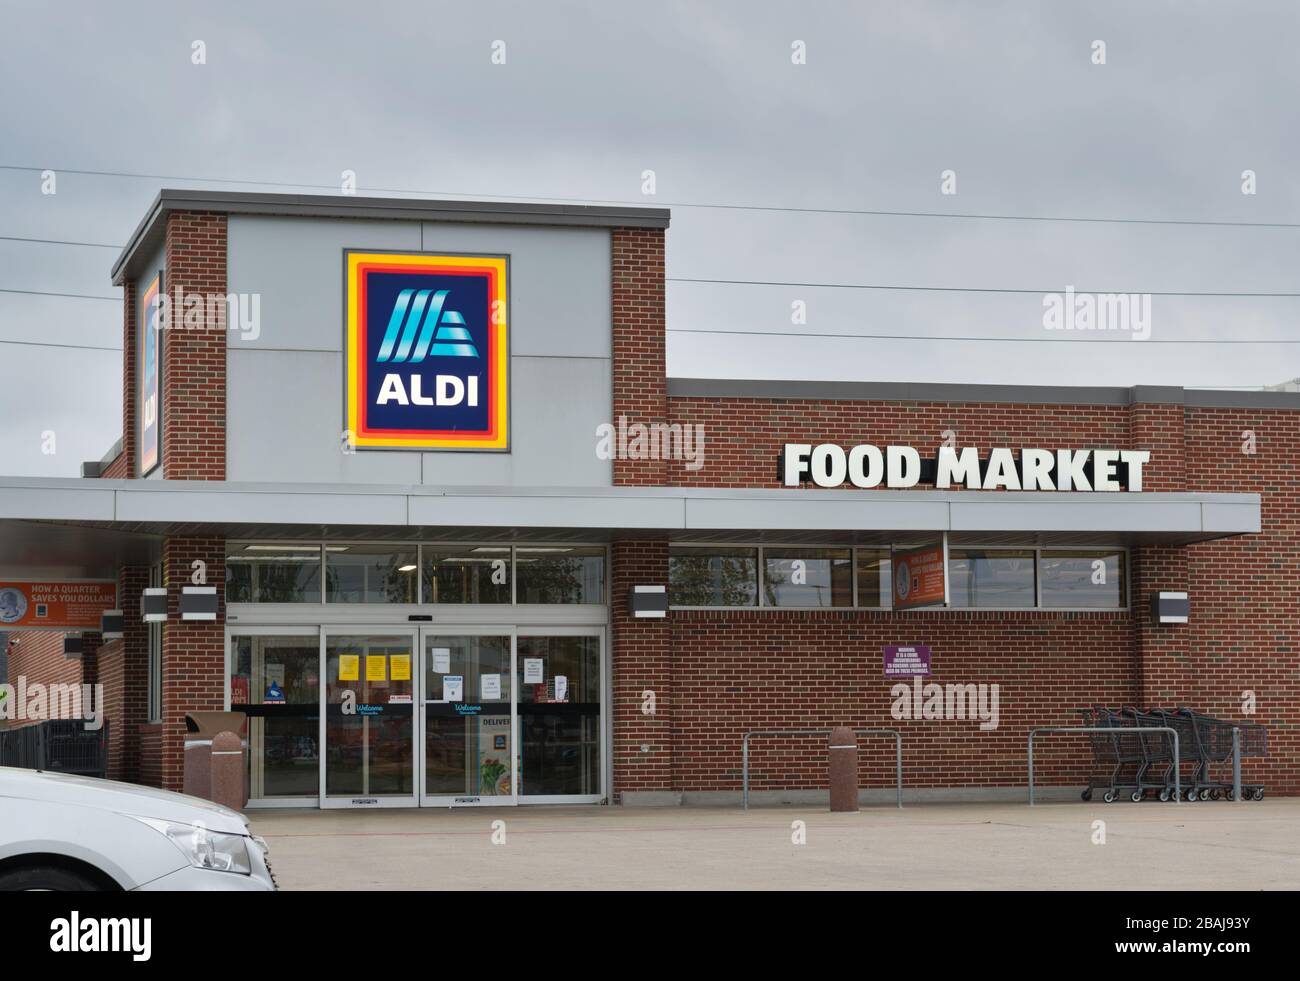 Aldi grocery store exterior in Houston, TX. Discount supermarket chain store located in 20 countries with over 10,000 locations. Founded in Germany. Stock Photo